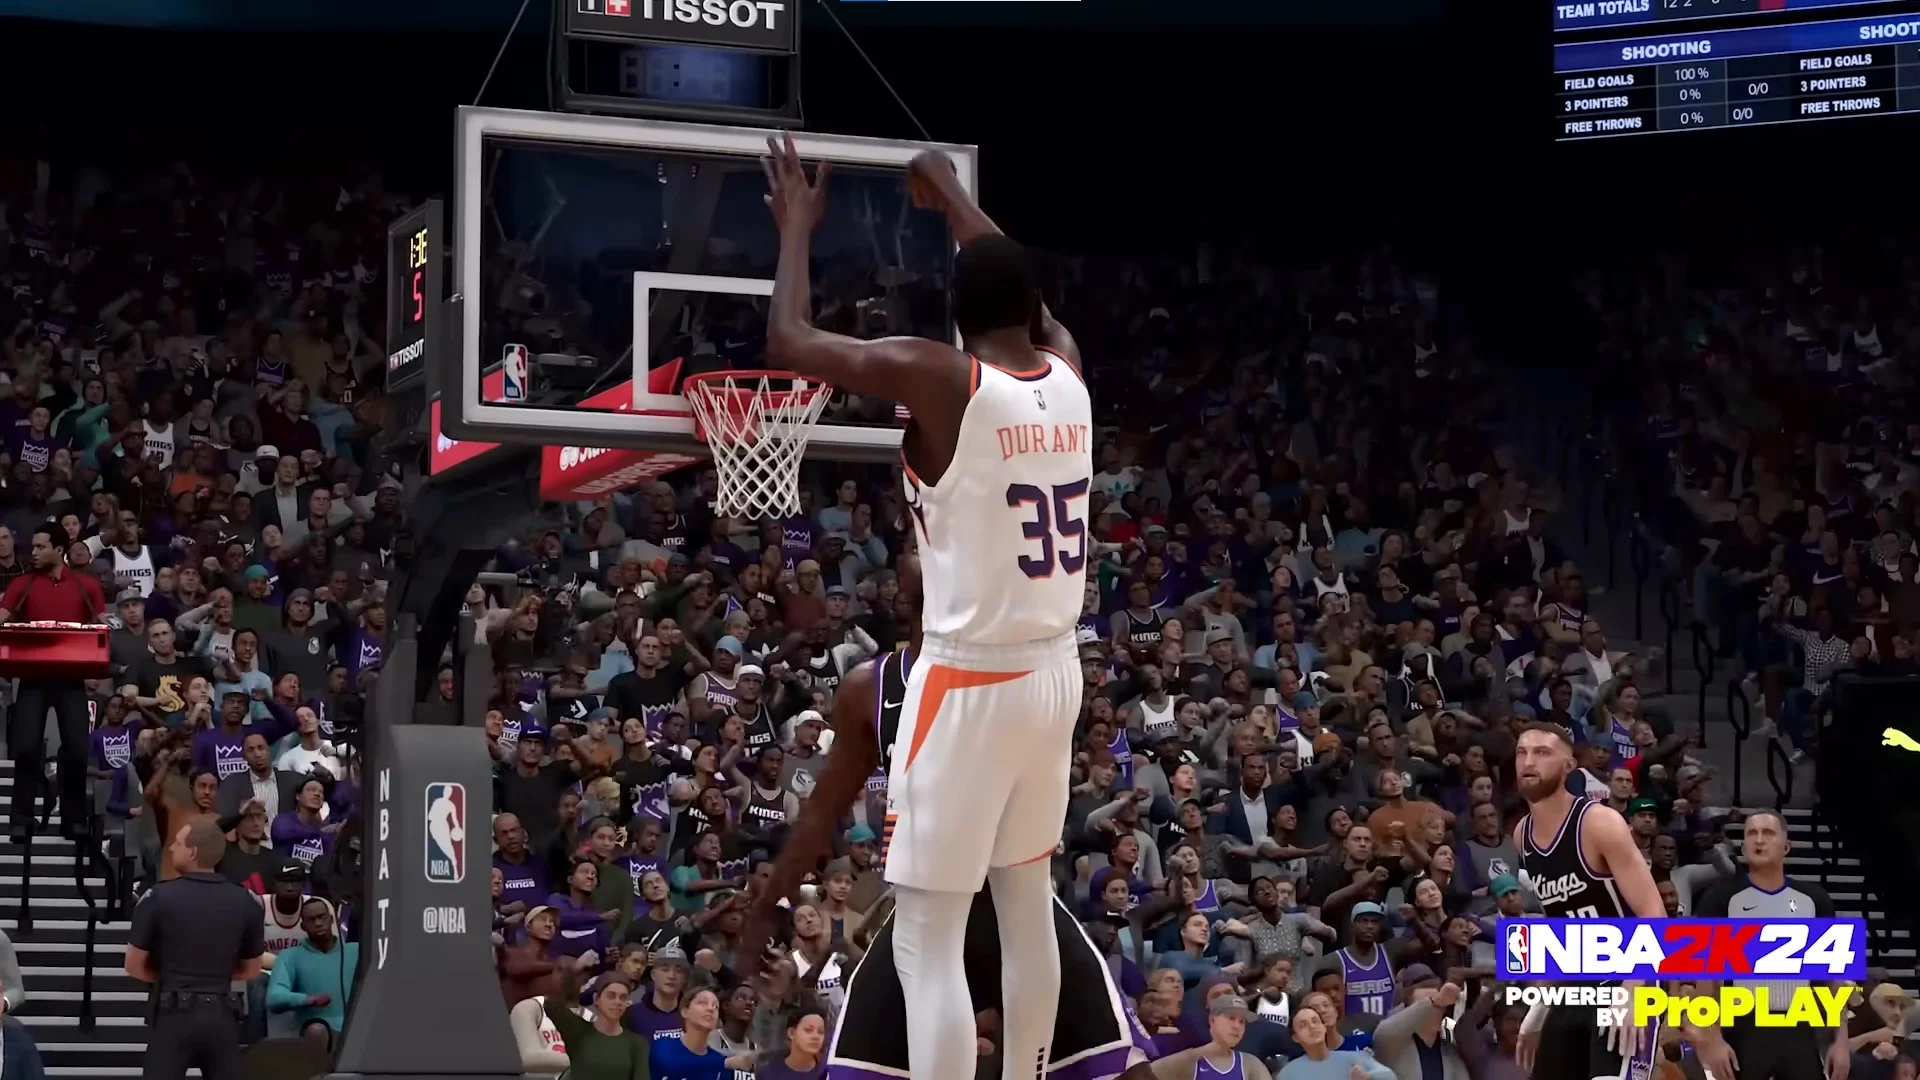 Animations Feature In NBA 2K24